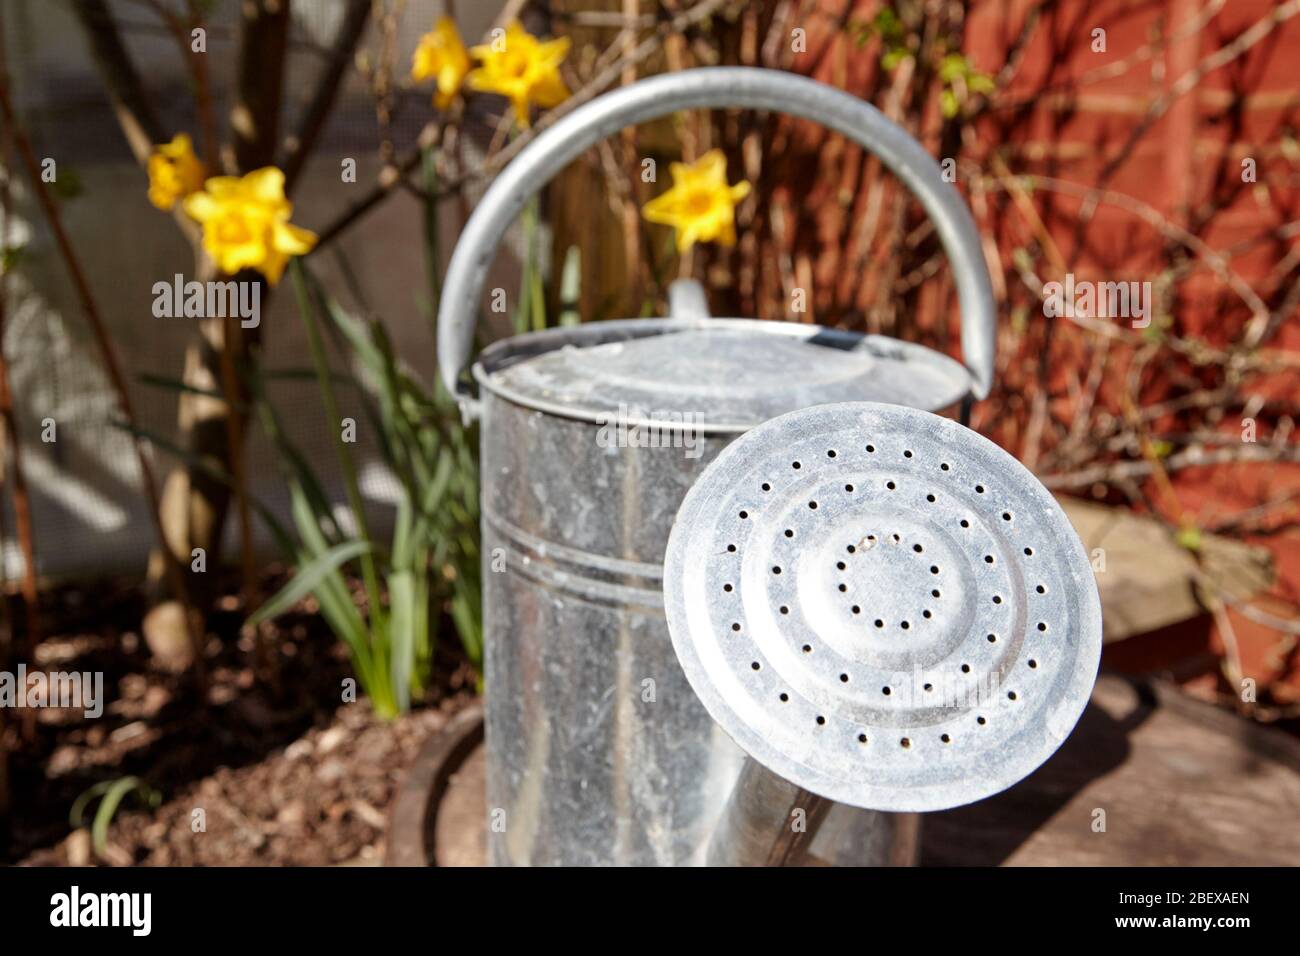 rose on an old fashioned style metal watering can in a garden Newtownabbey Northern Ireland UK Stock Photo